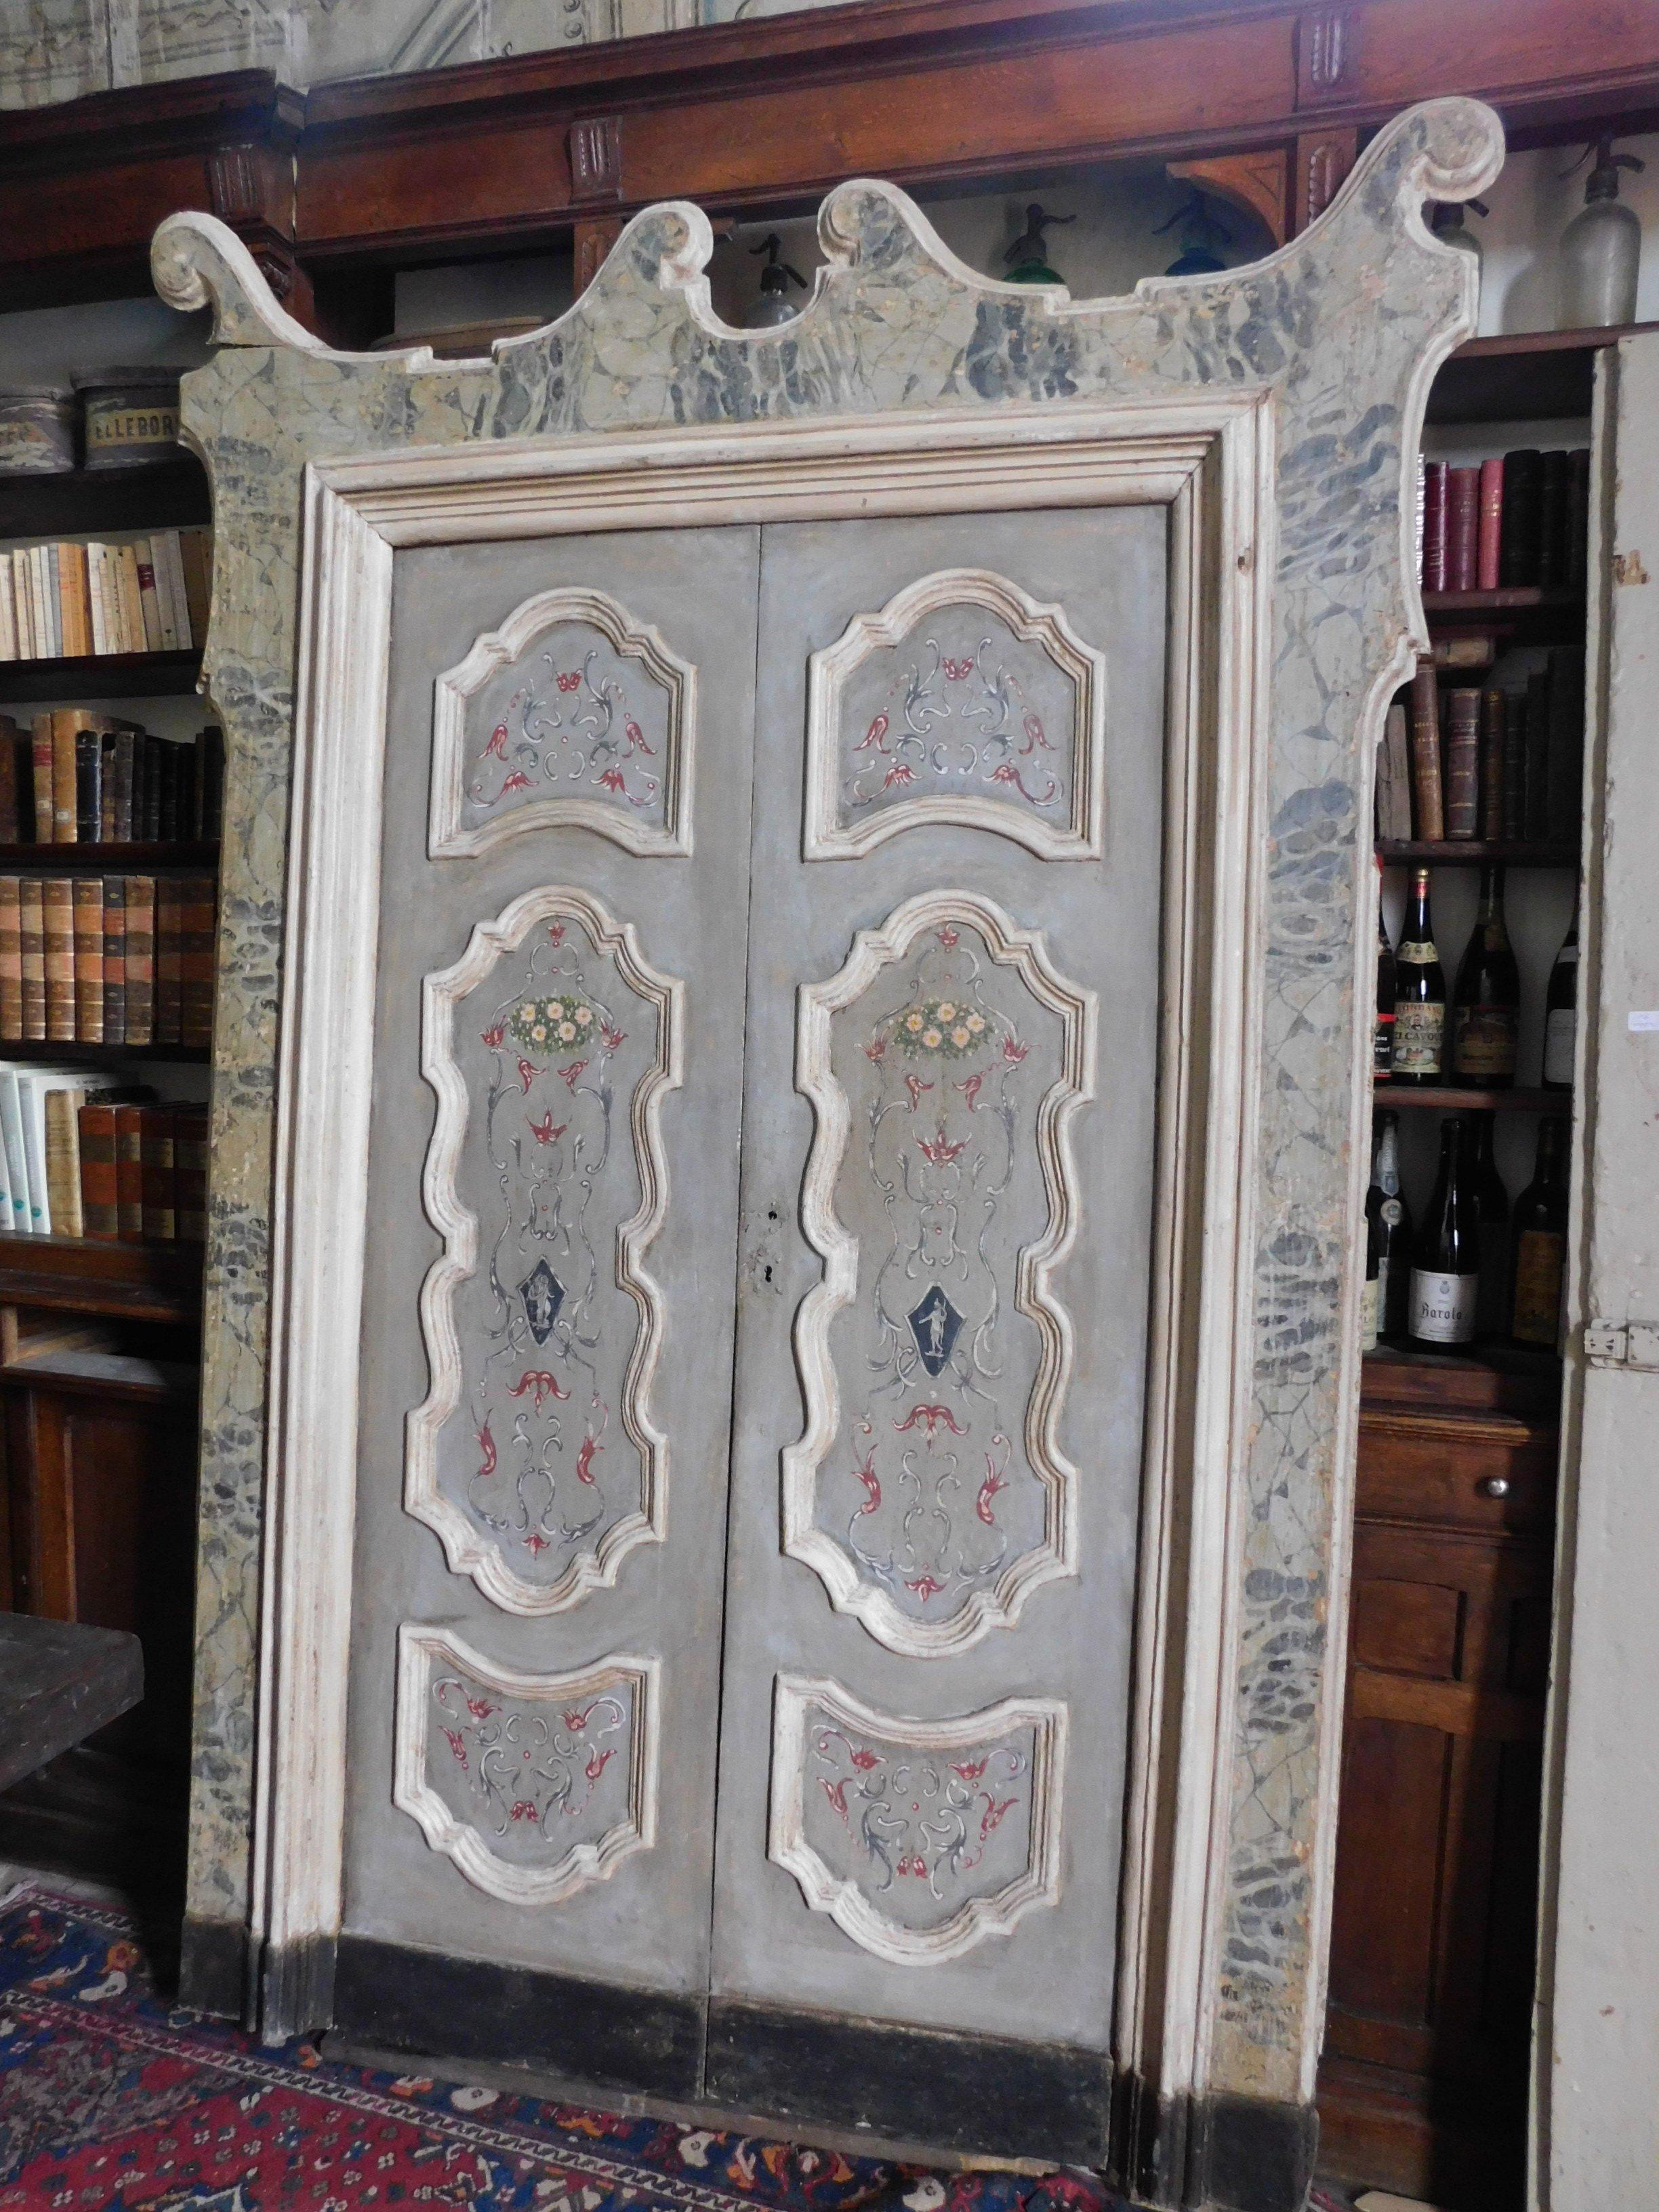 Antique four lacquered doors early 1700, from Naples, with frame lacquered fake marble, mis. max cm 165 x H 250, doors passage cm 106 x 210 H,
in perfect condition, salable only together, in perfect condition and already restored. Neutral and